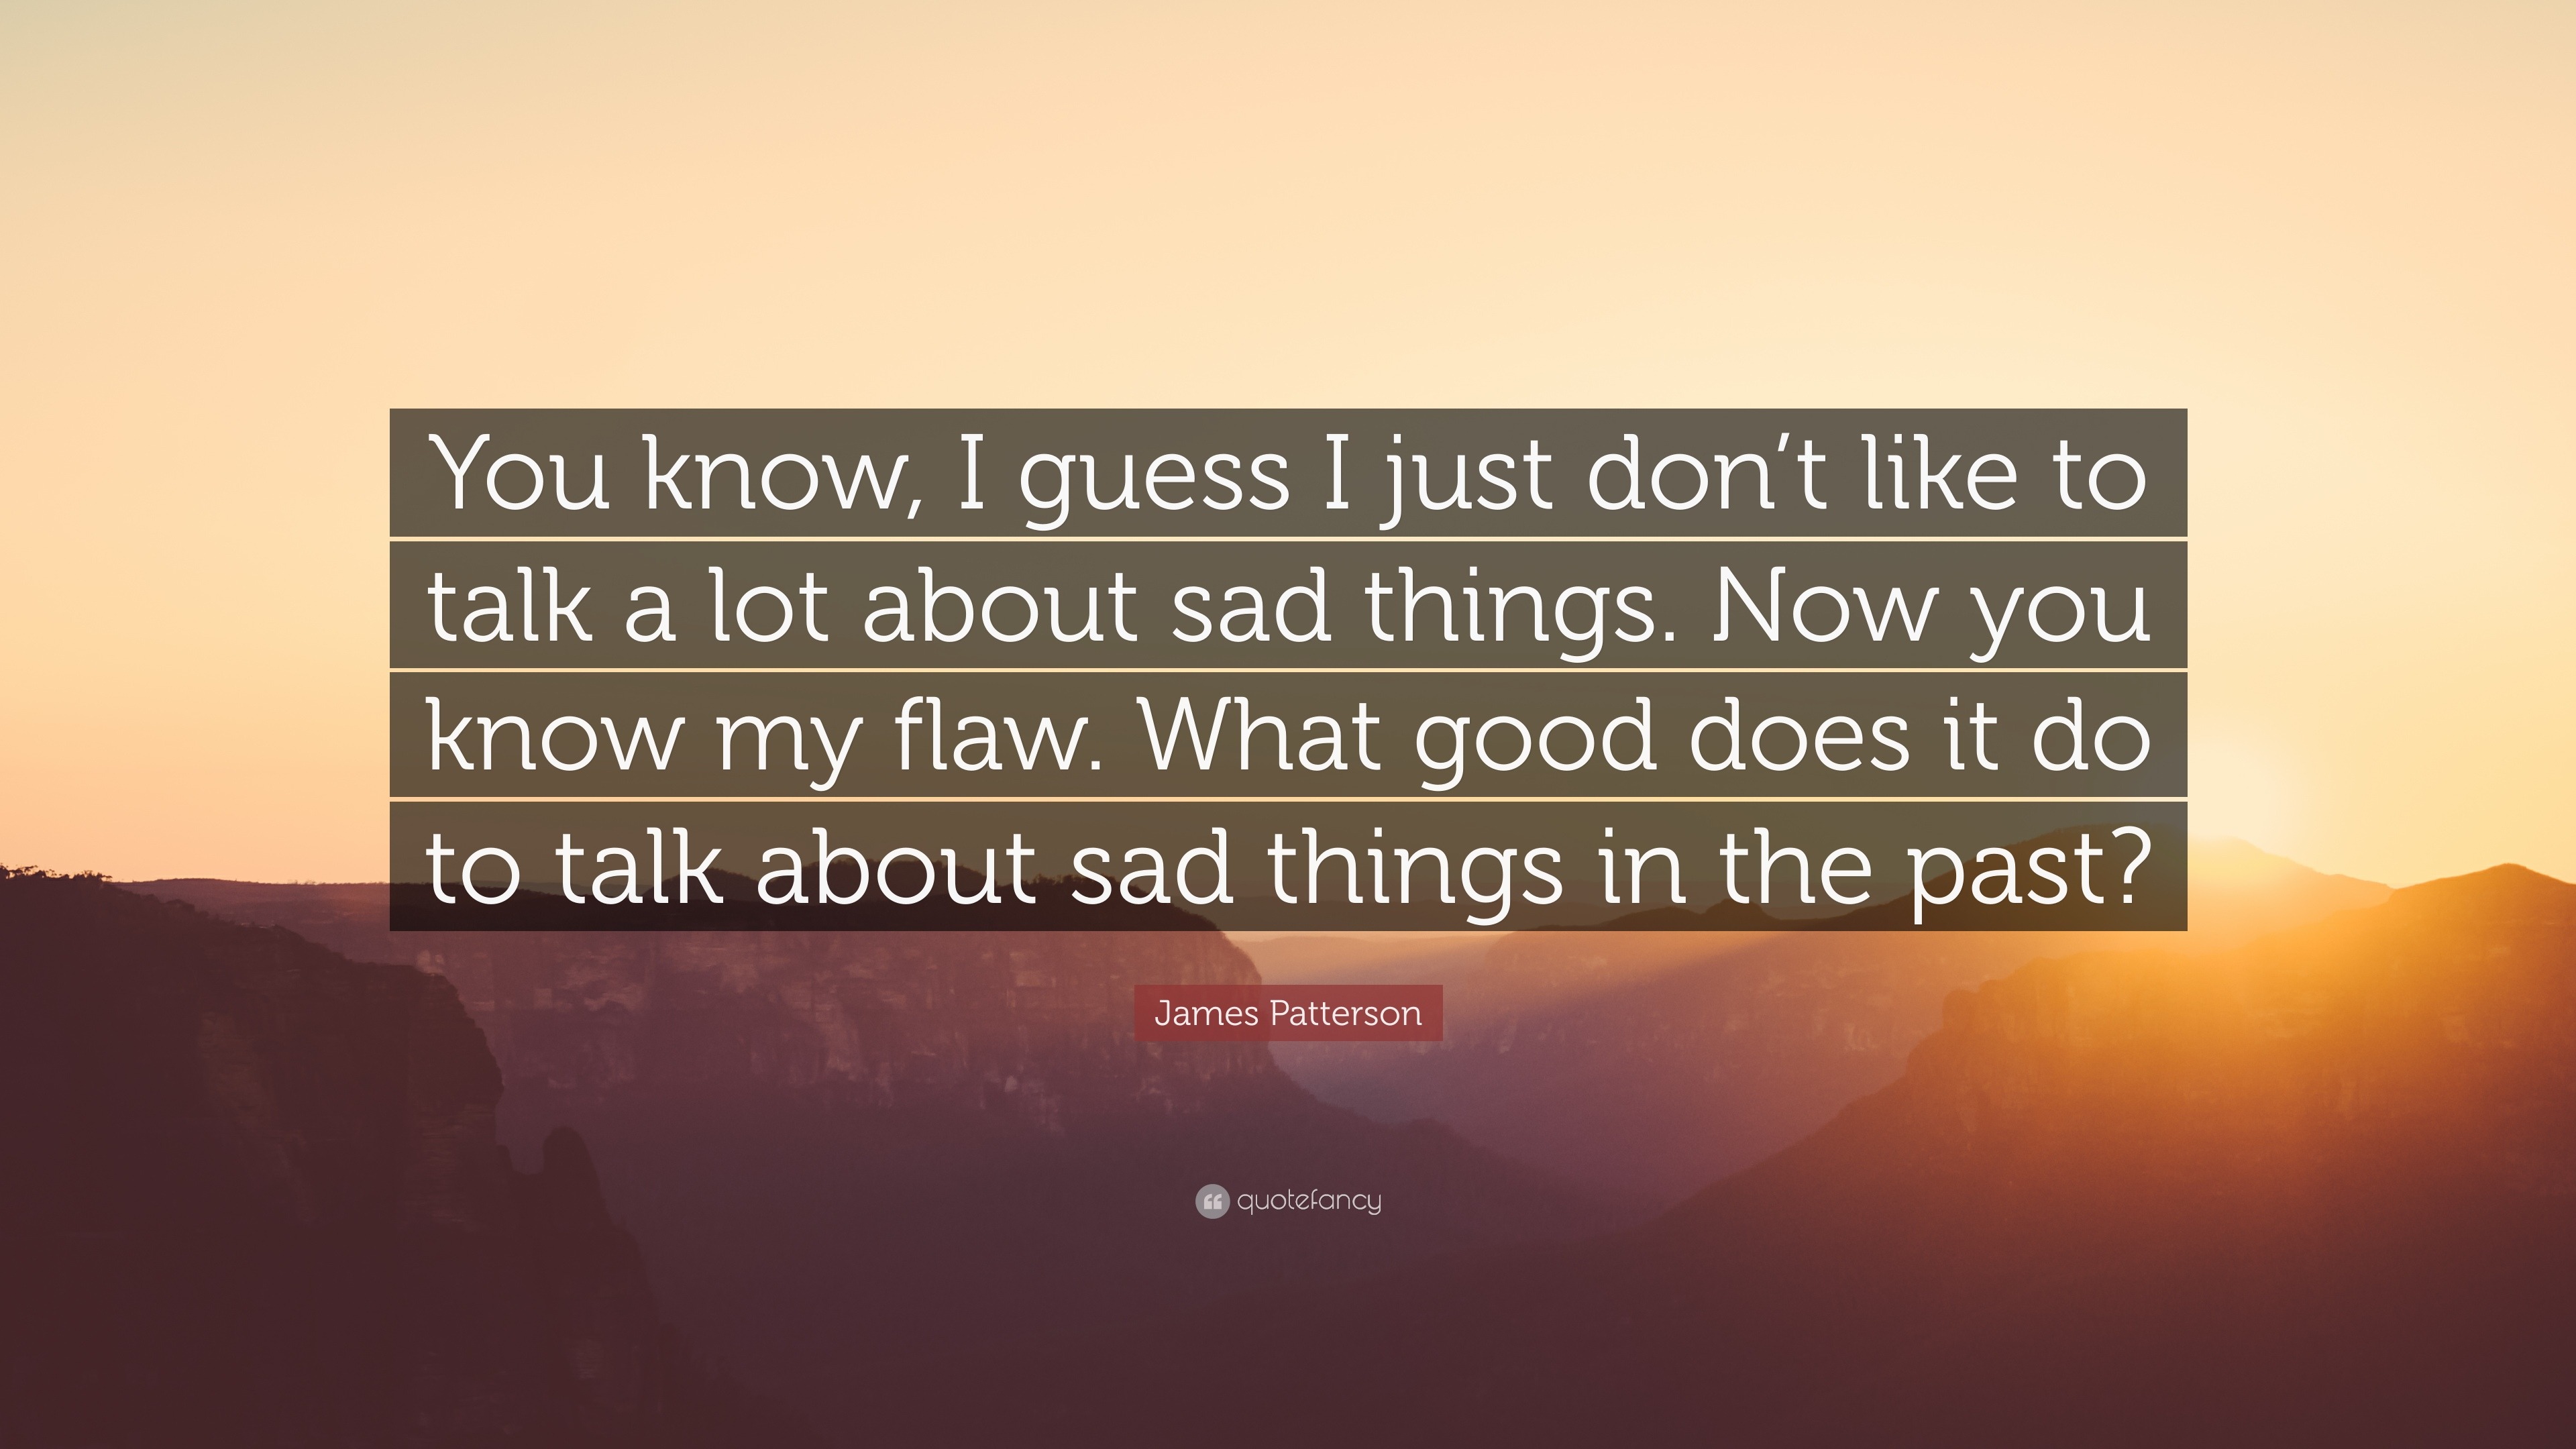 James Patterson Quote: “You know, I guess I just like to talk a lot about sad things. Now you know my flaw. What good does it do to a...”